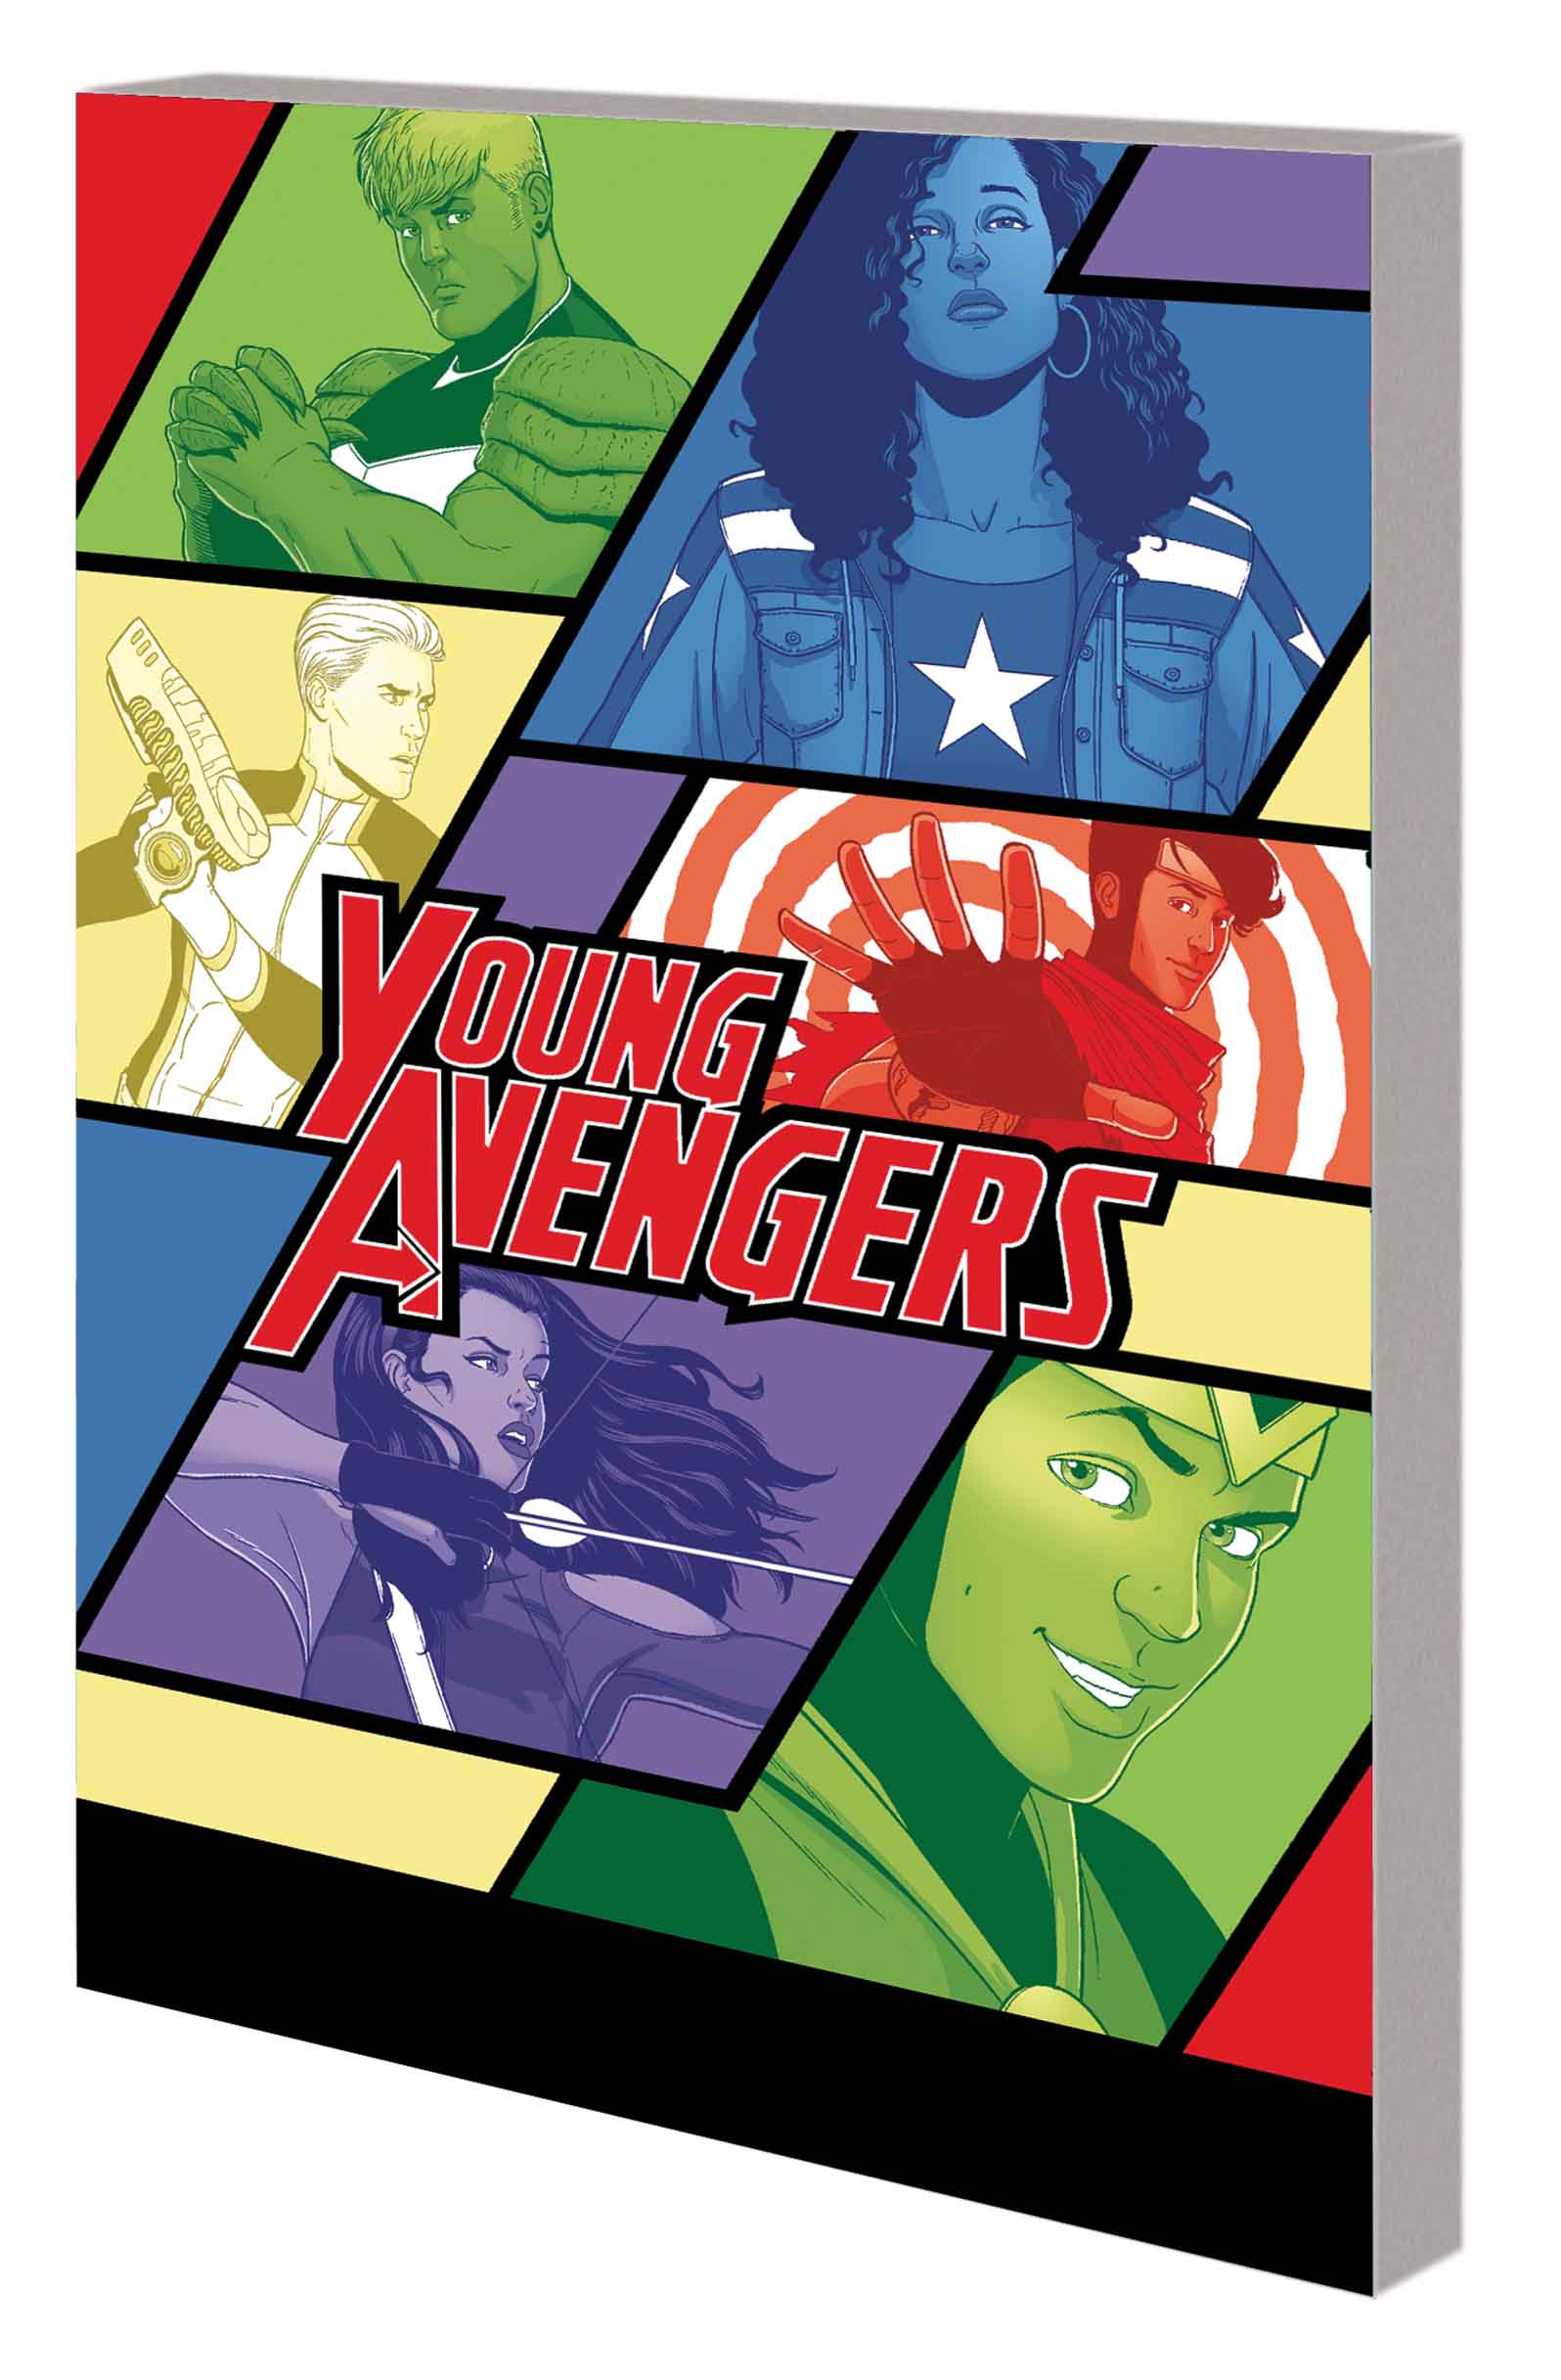 YOUNG AVENGERS VOL. 1: STYLE > SUBSTANCE TPB (MARVEL NOW) (Trade Paperback)